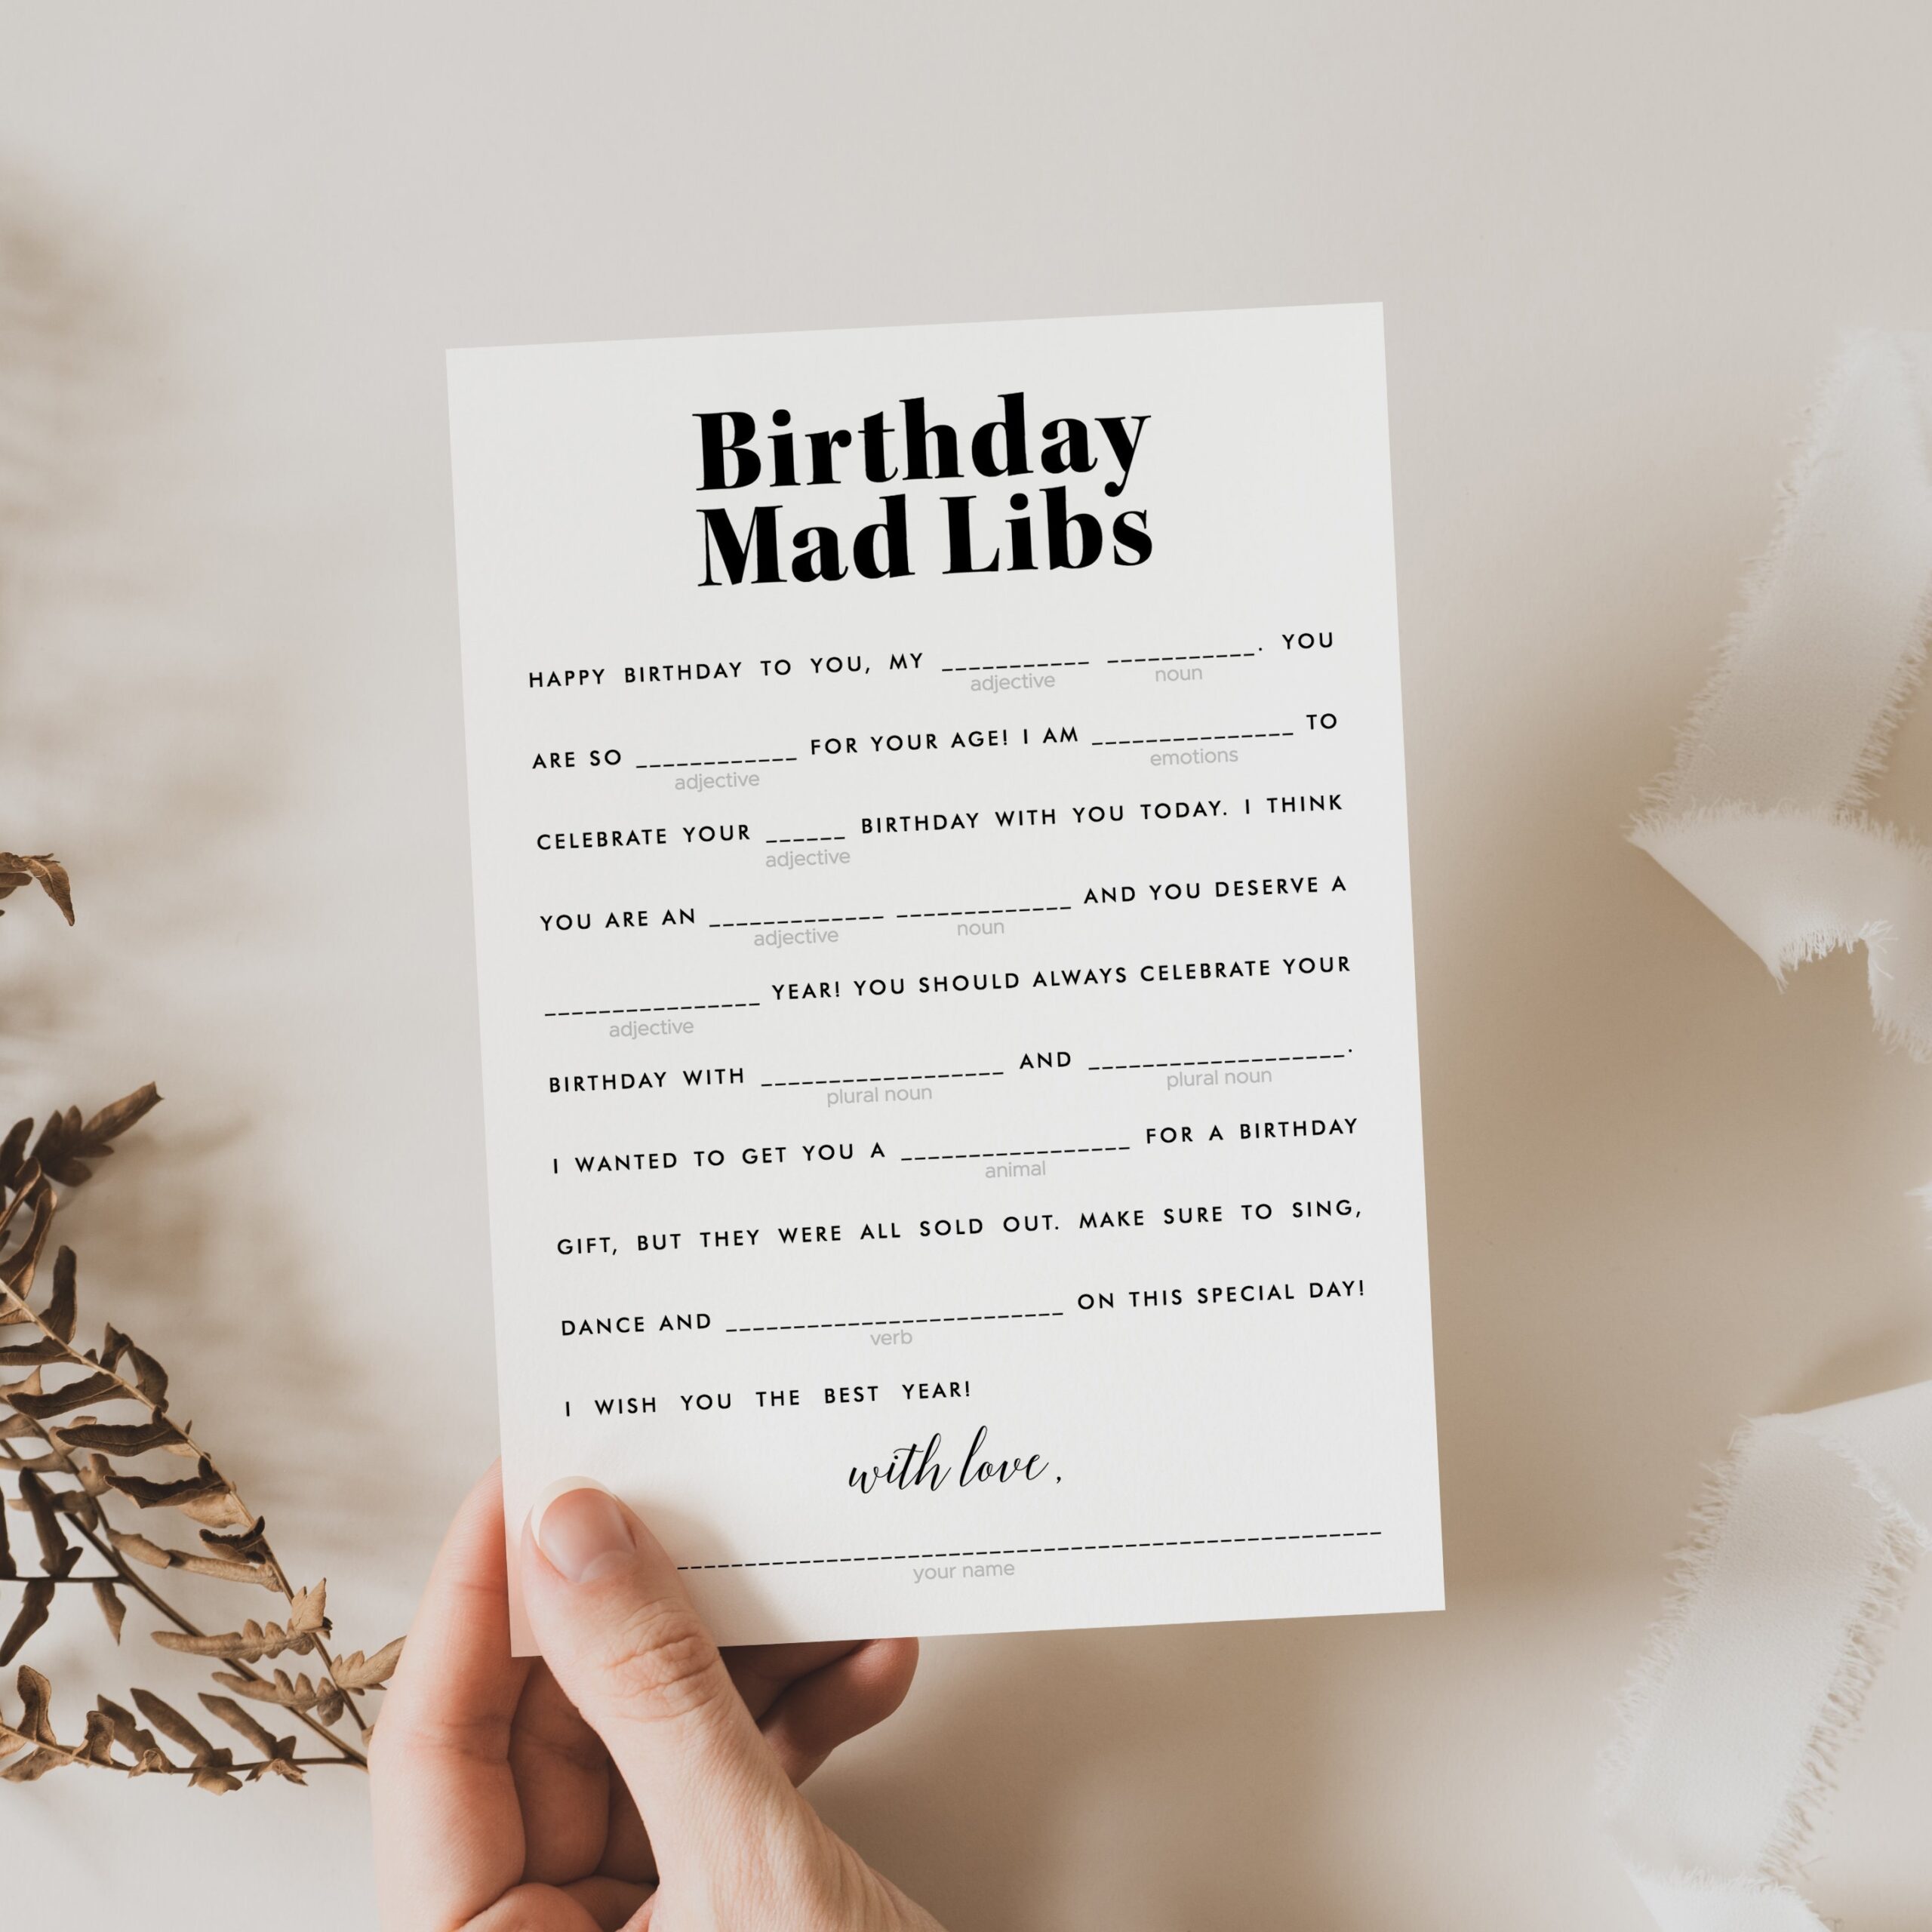 Birthday Mad Libs Printable Modern Birthday Party Games Gender Neutral Bday Bash Activities For Adults Teen Birthday Advice And Wishes MV2 Etsy